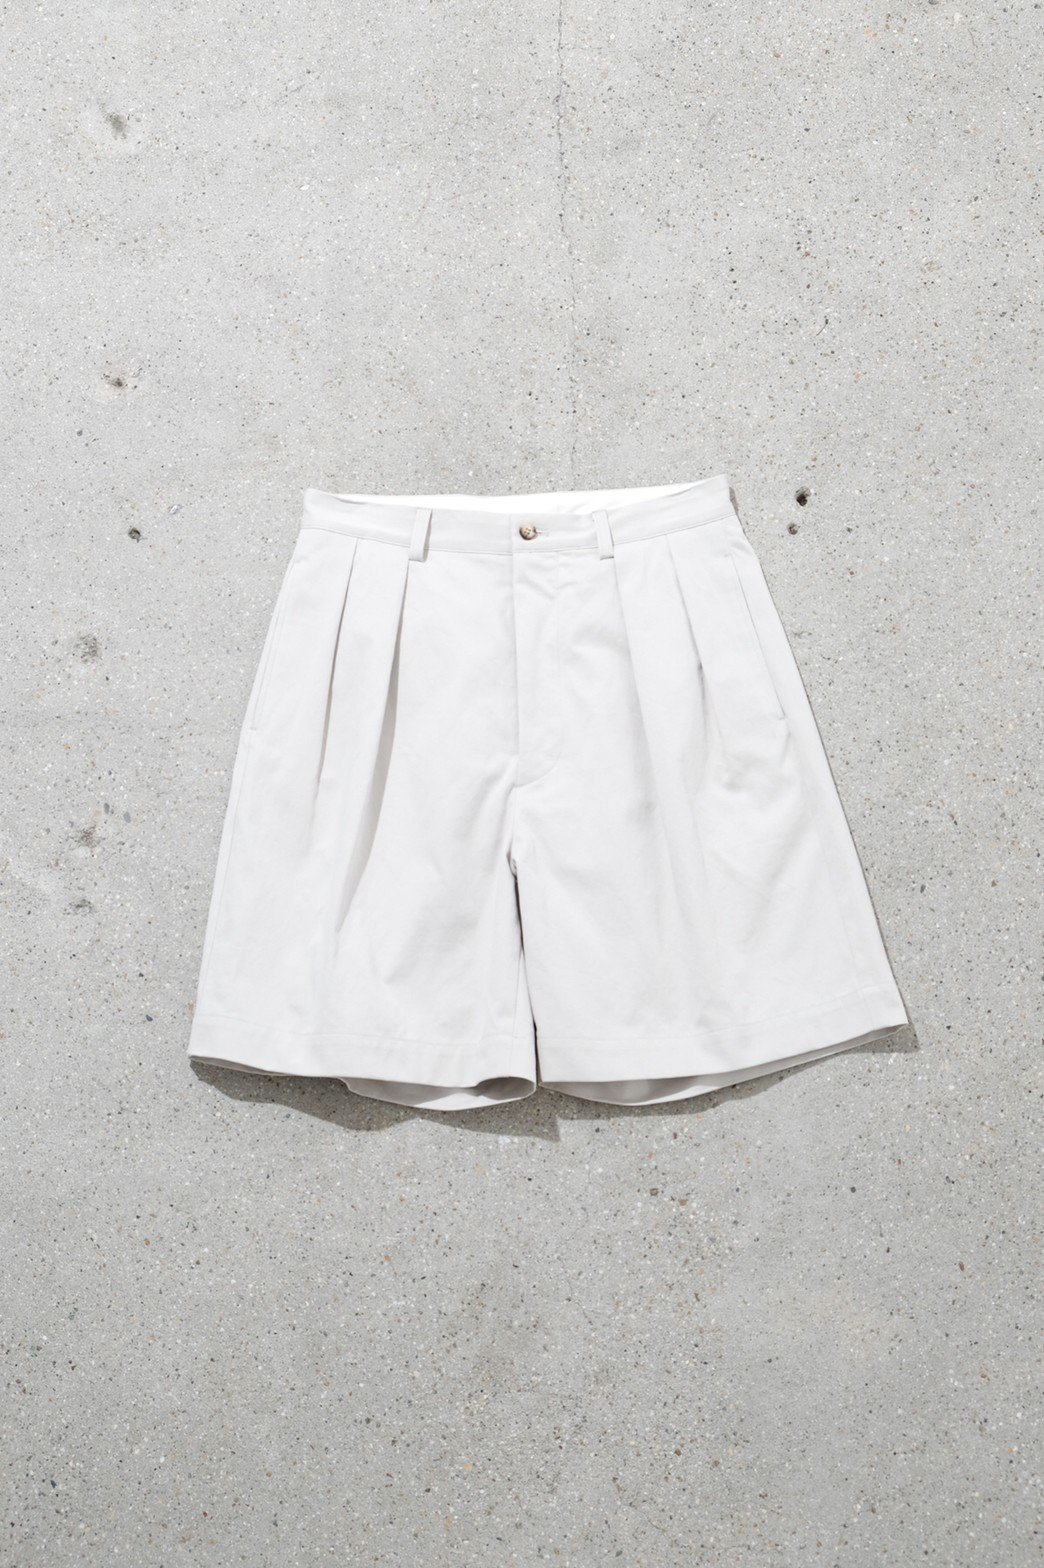 A.PRESSE / Two Tuck Chino Shorts